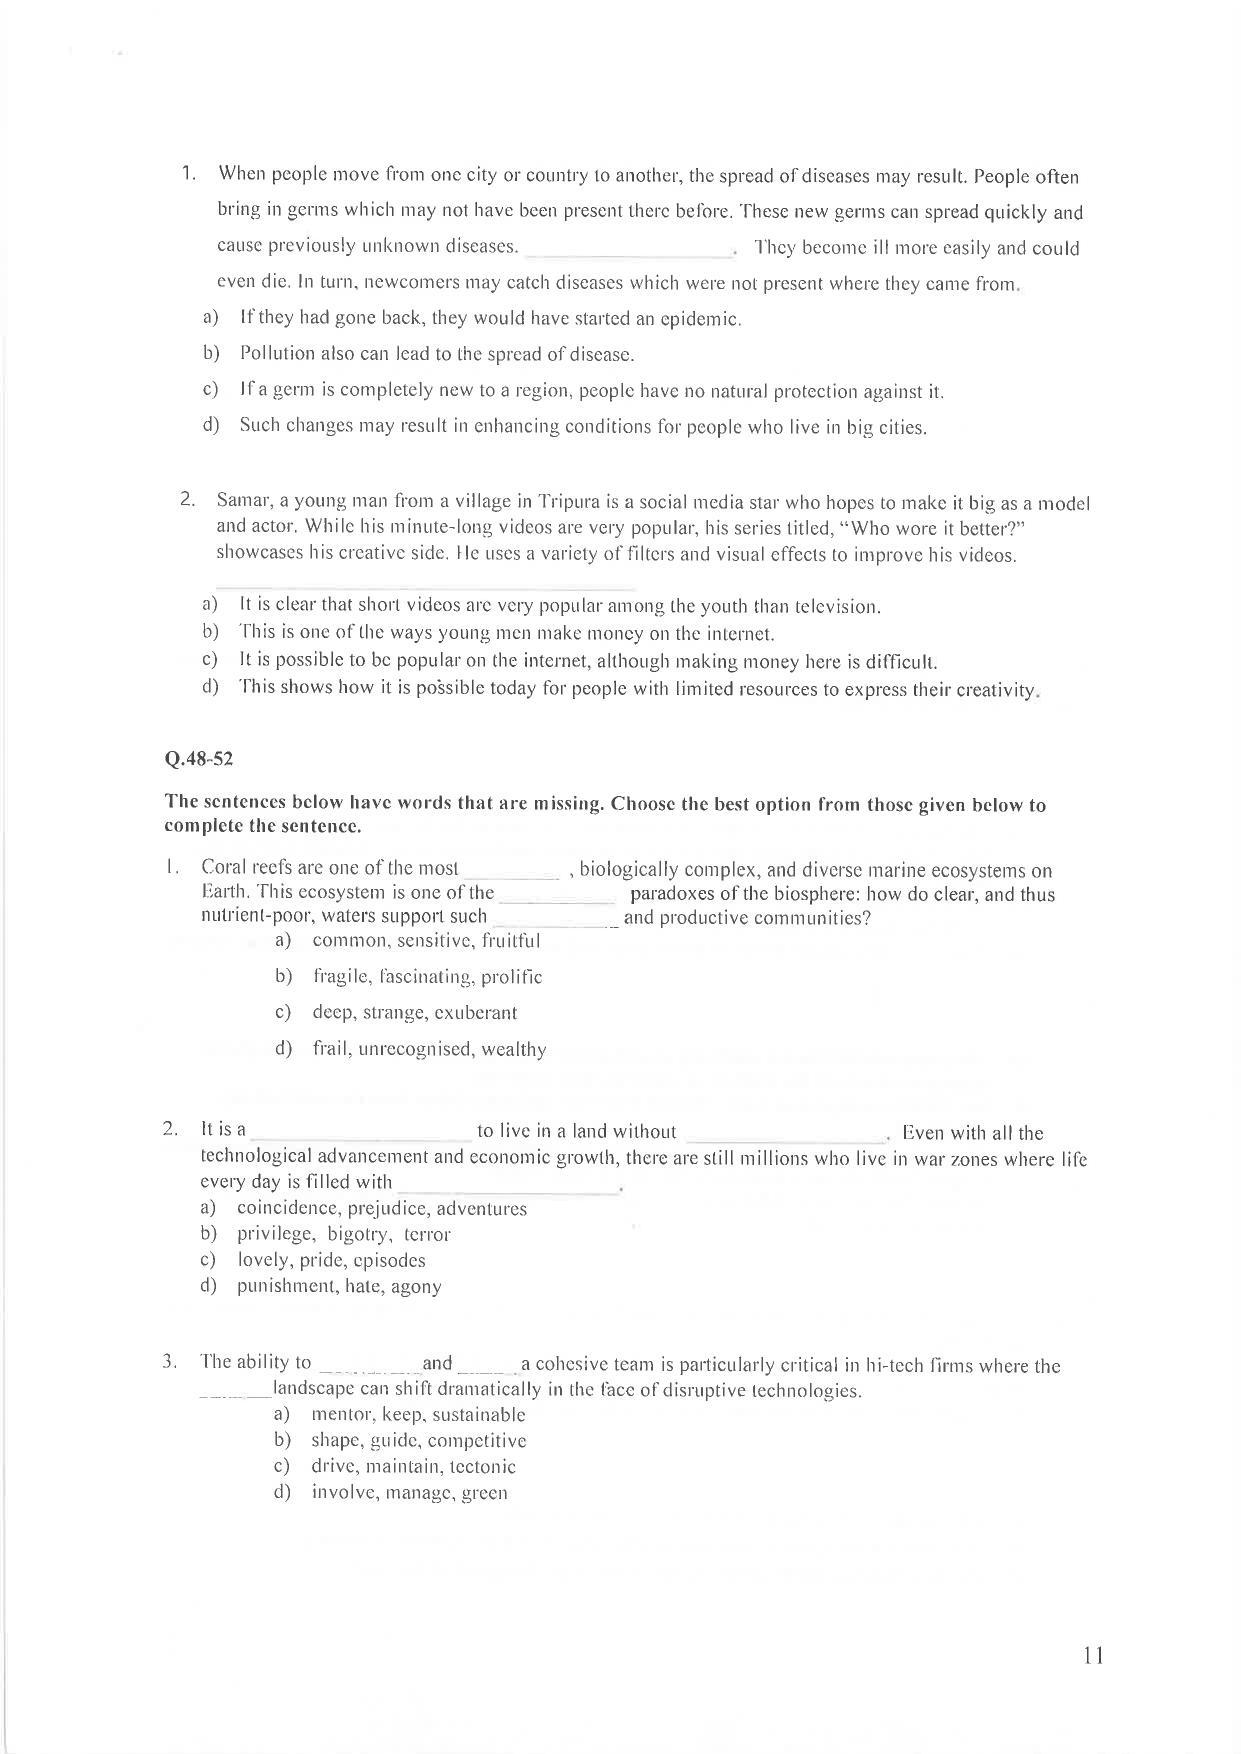 IIM Indore IPM 2020 Question Paper - Page 11